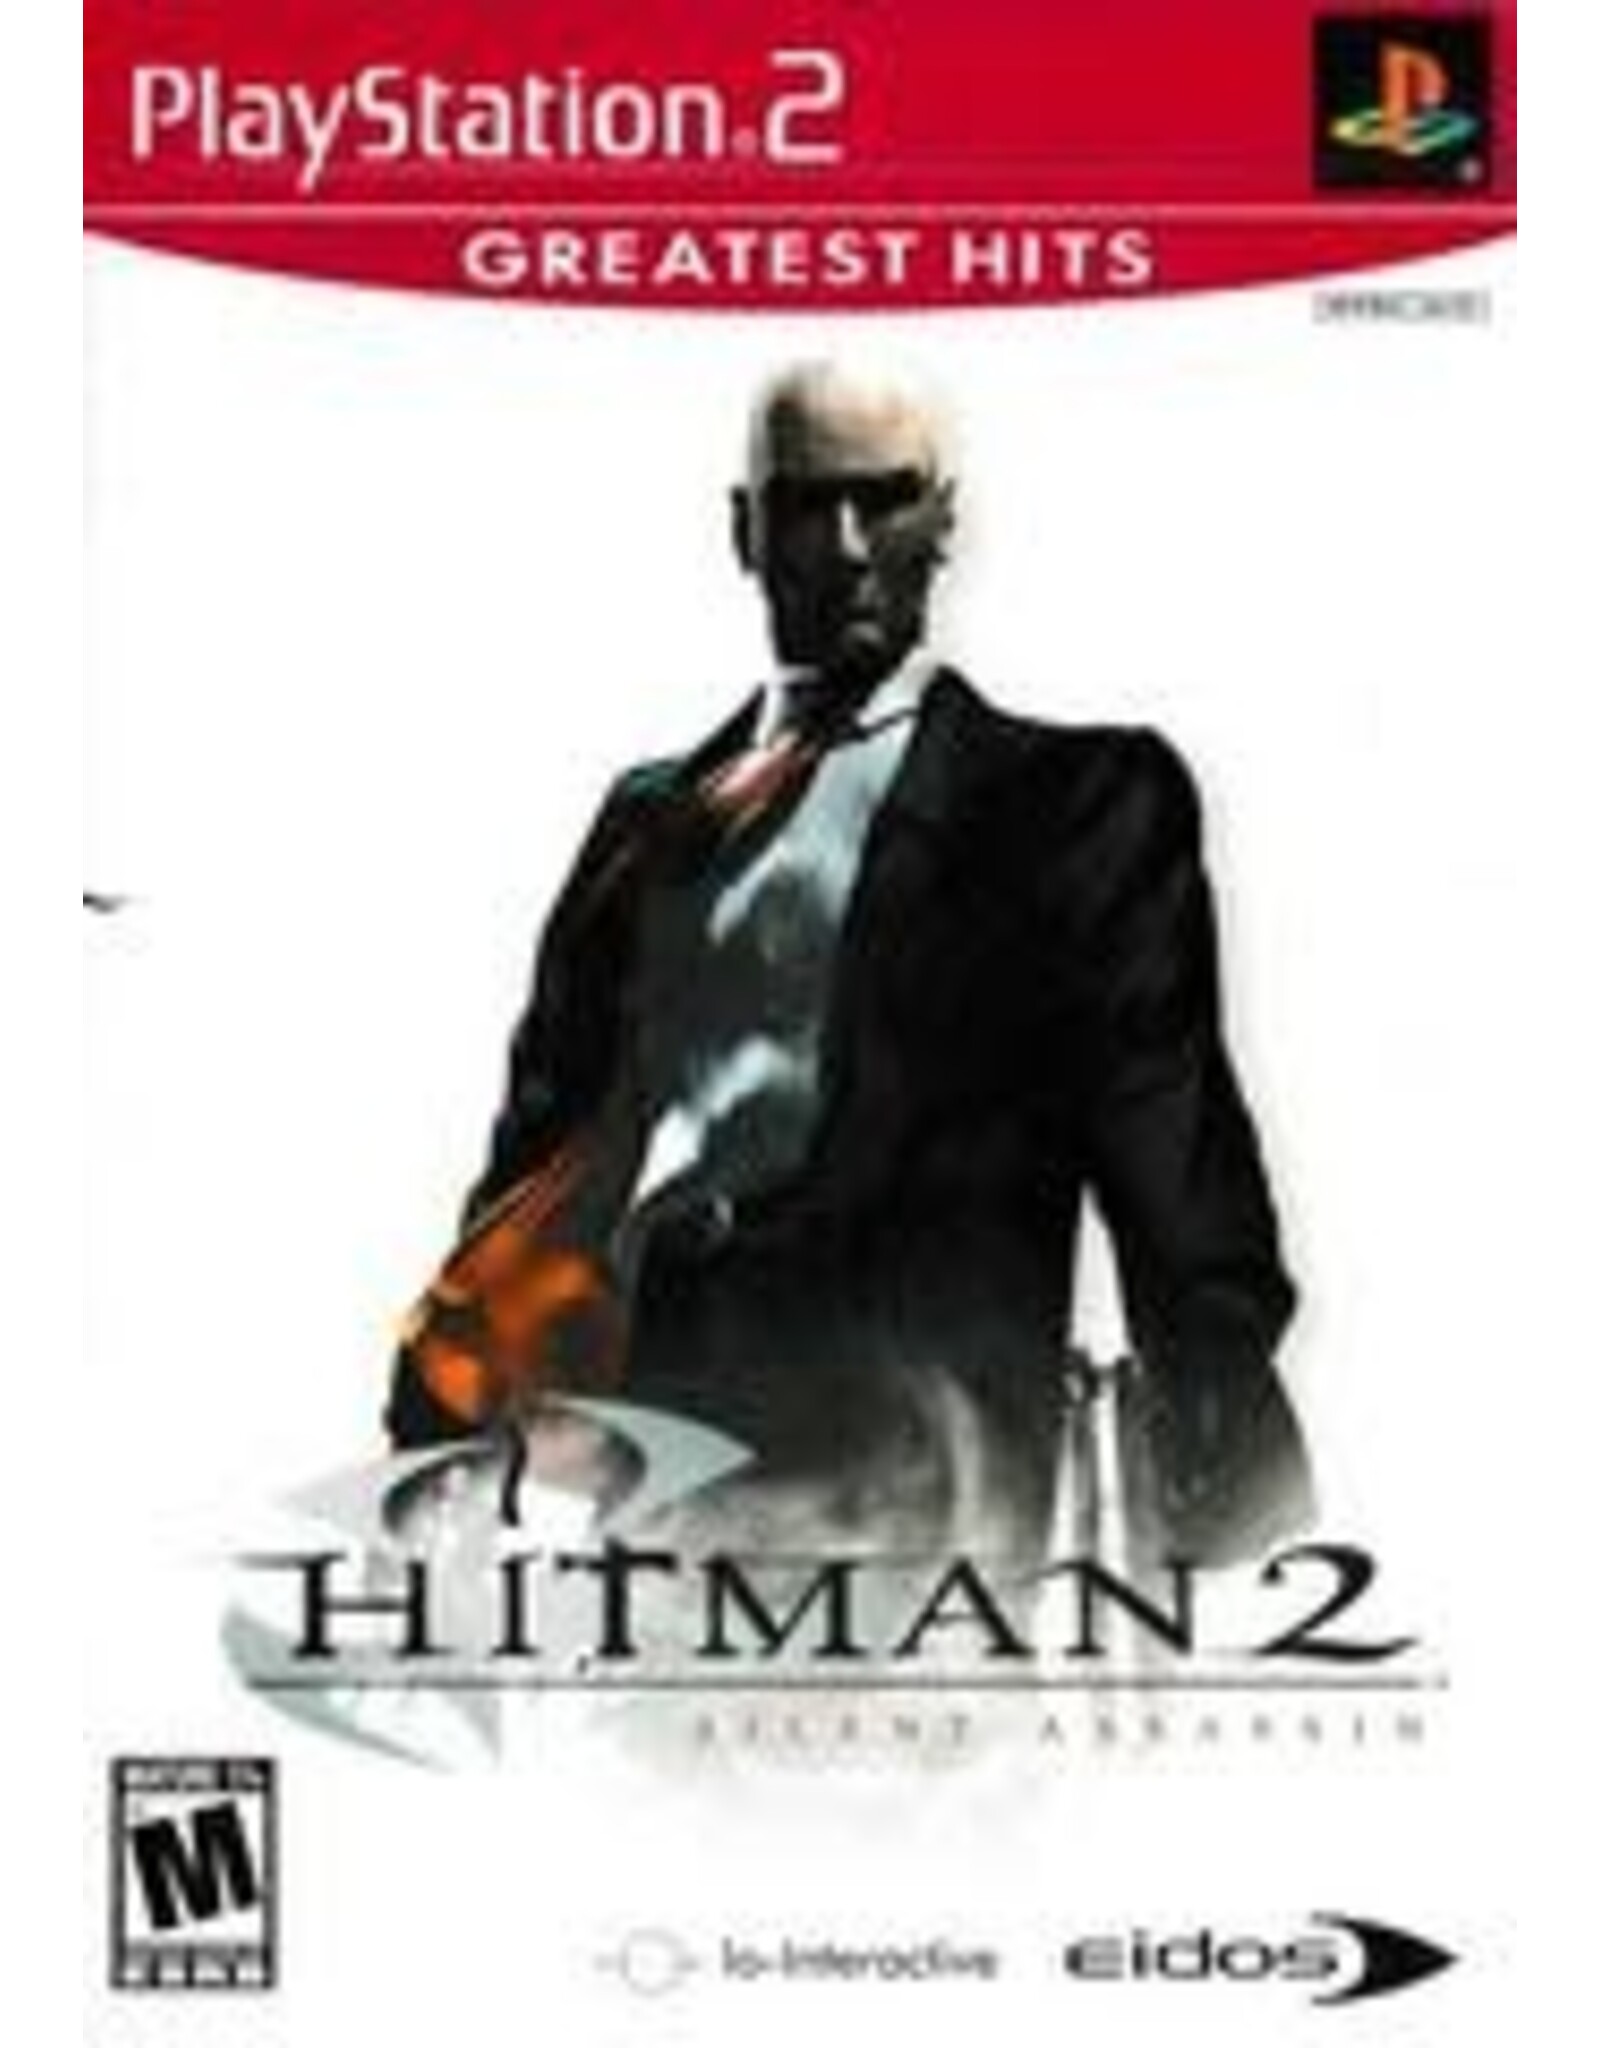 Playstation 2 Hitman 2 Silent Assassin-Greatest Hits (Used)